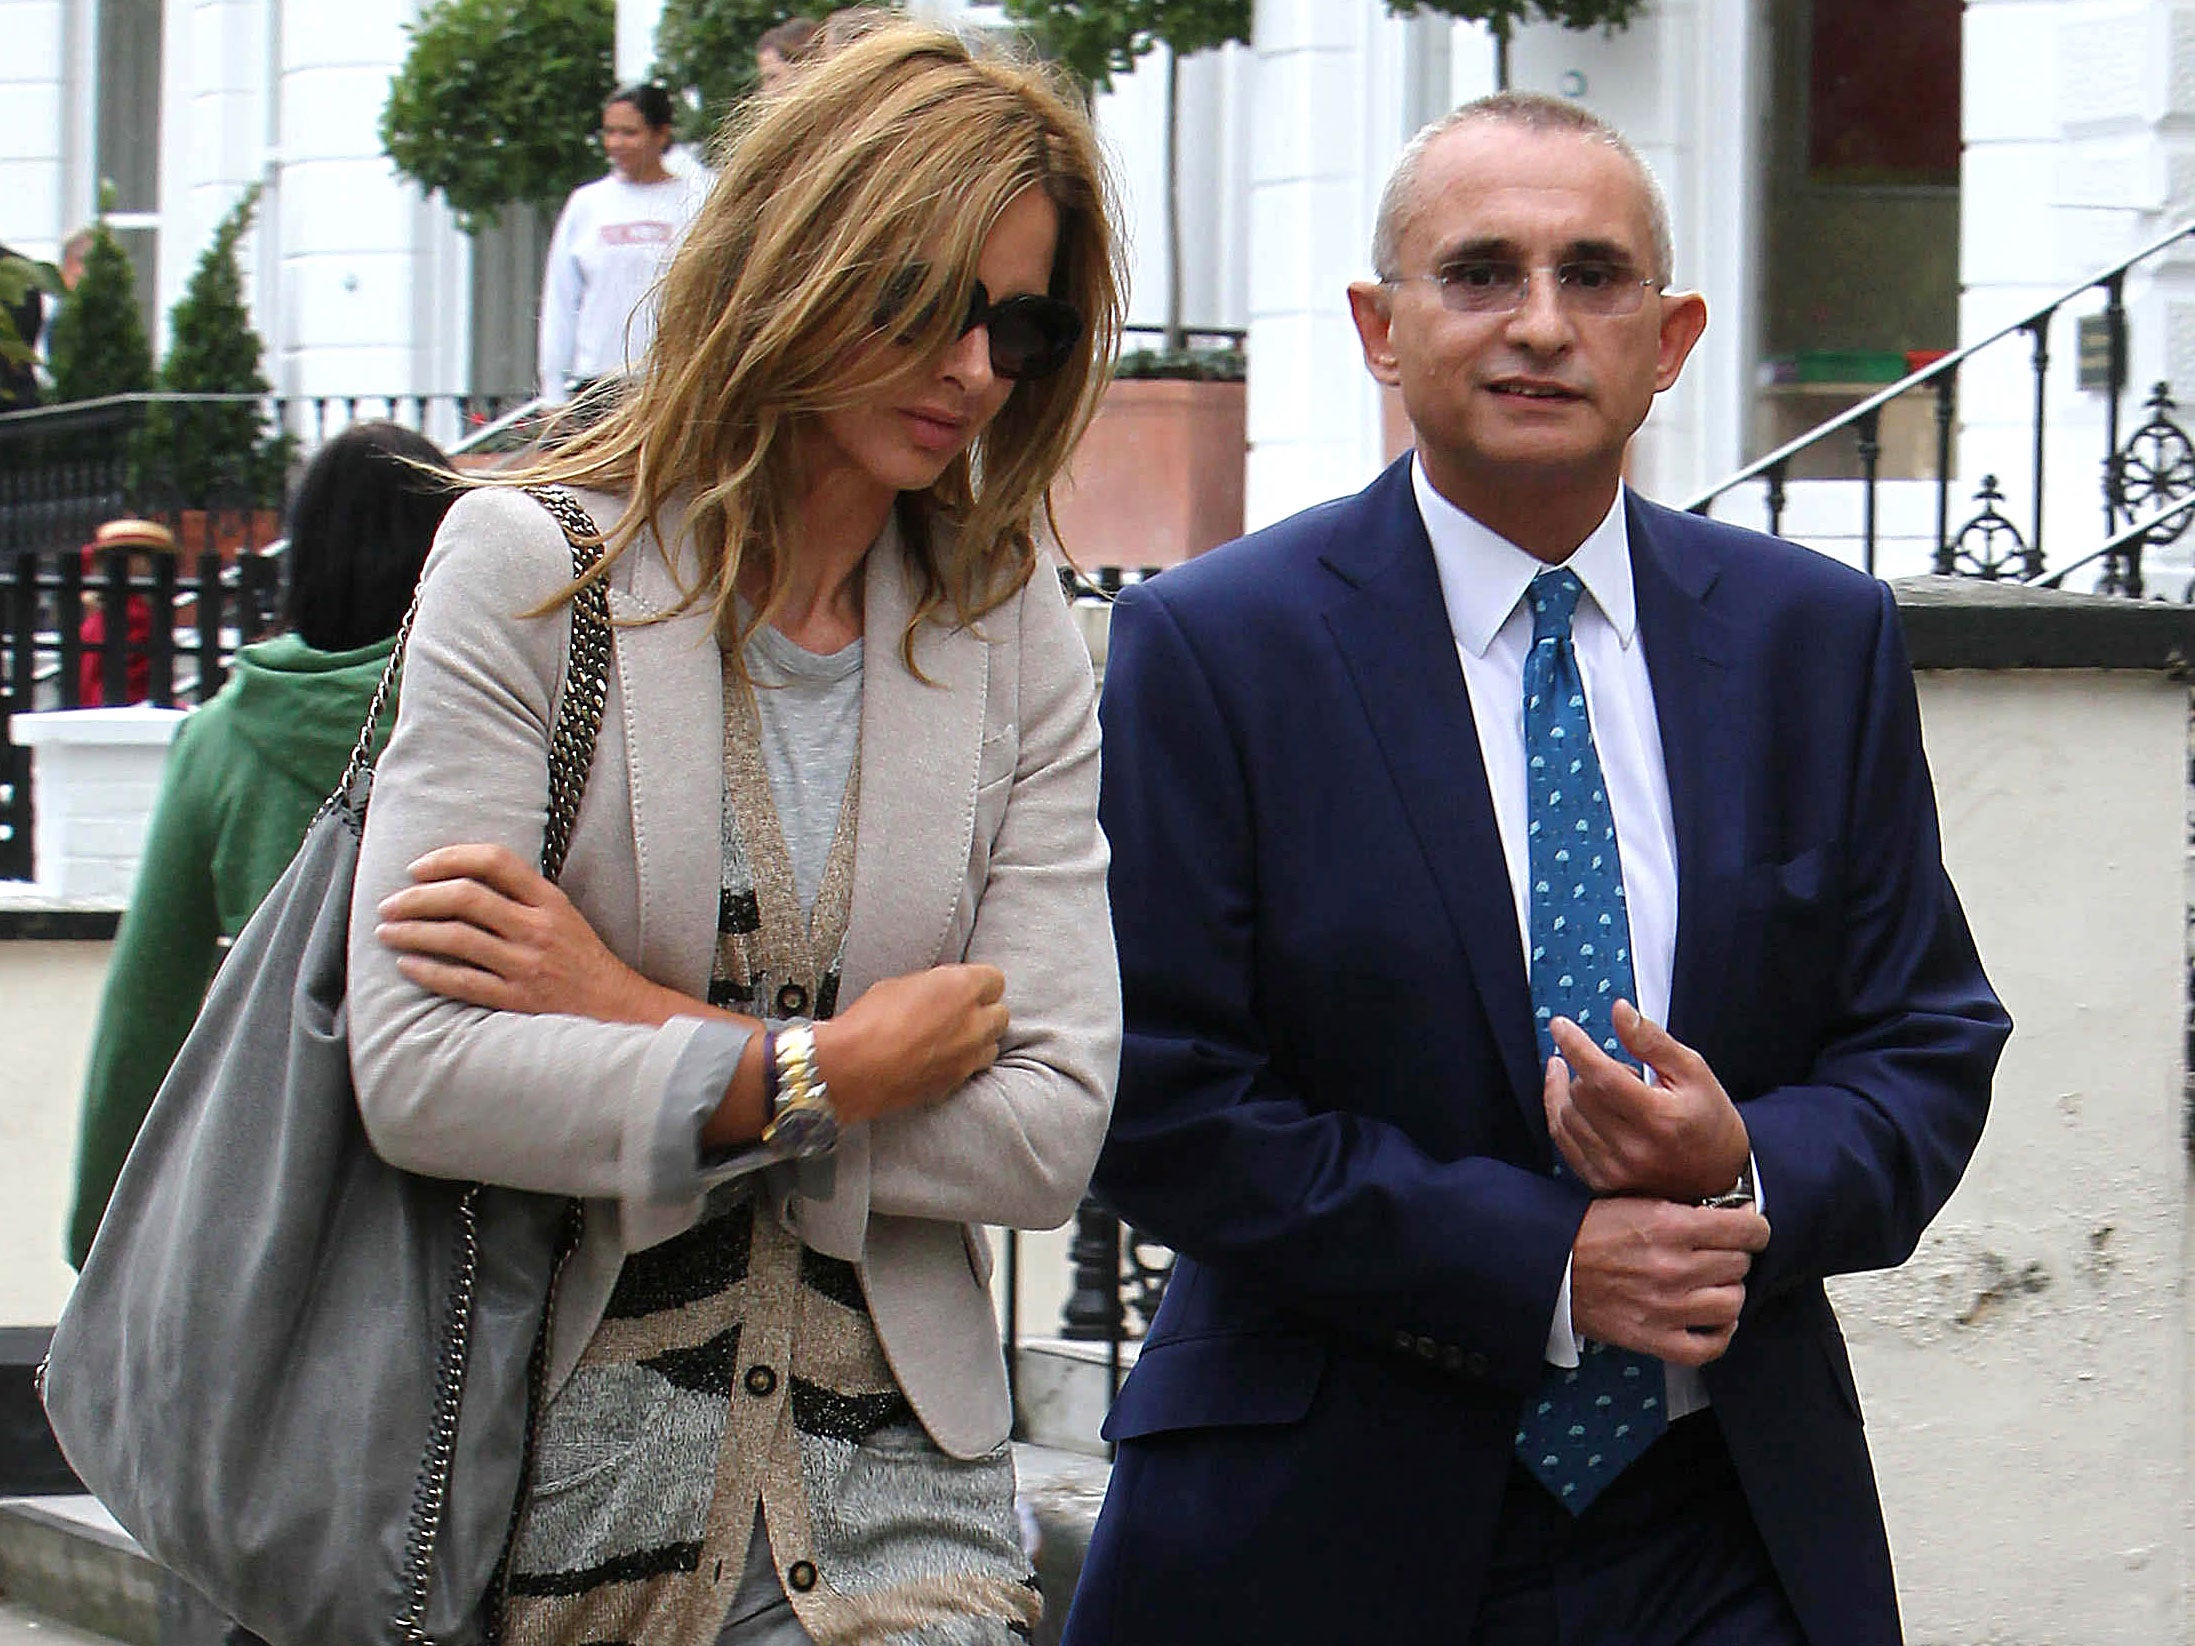 Trinny Woodall now: Grieving her first husband.